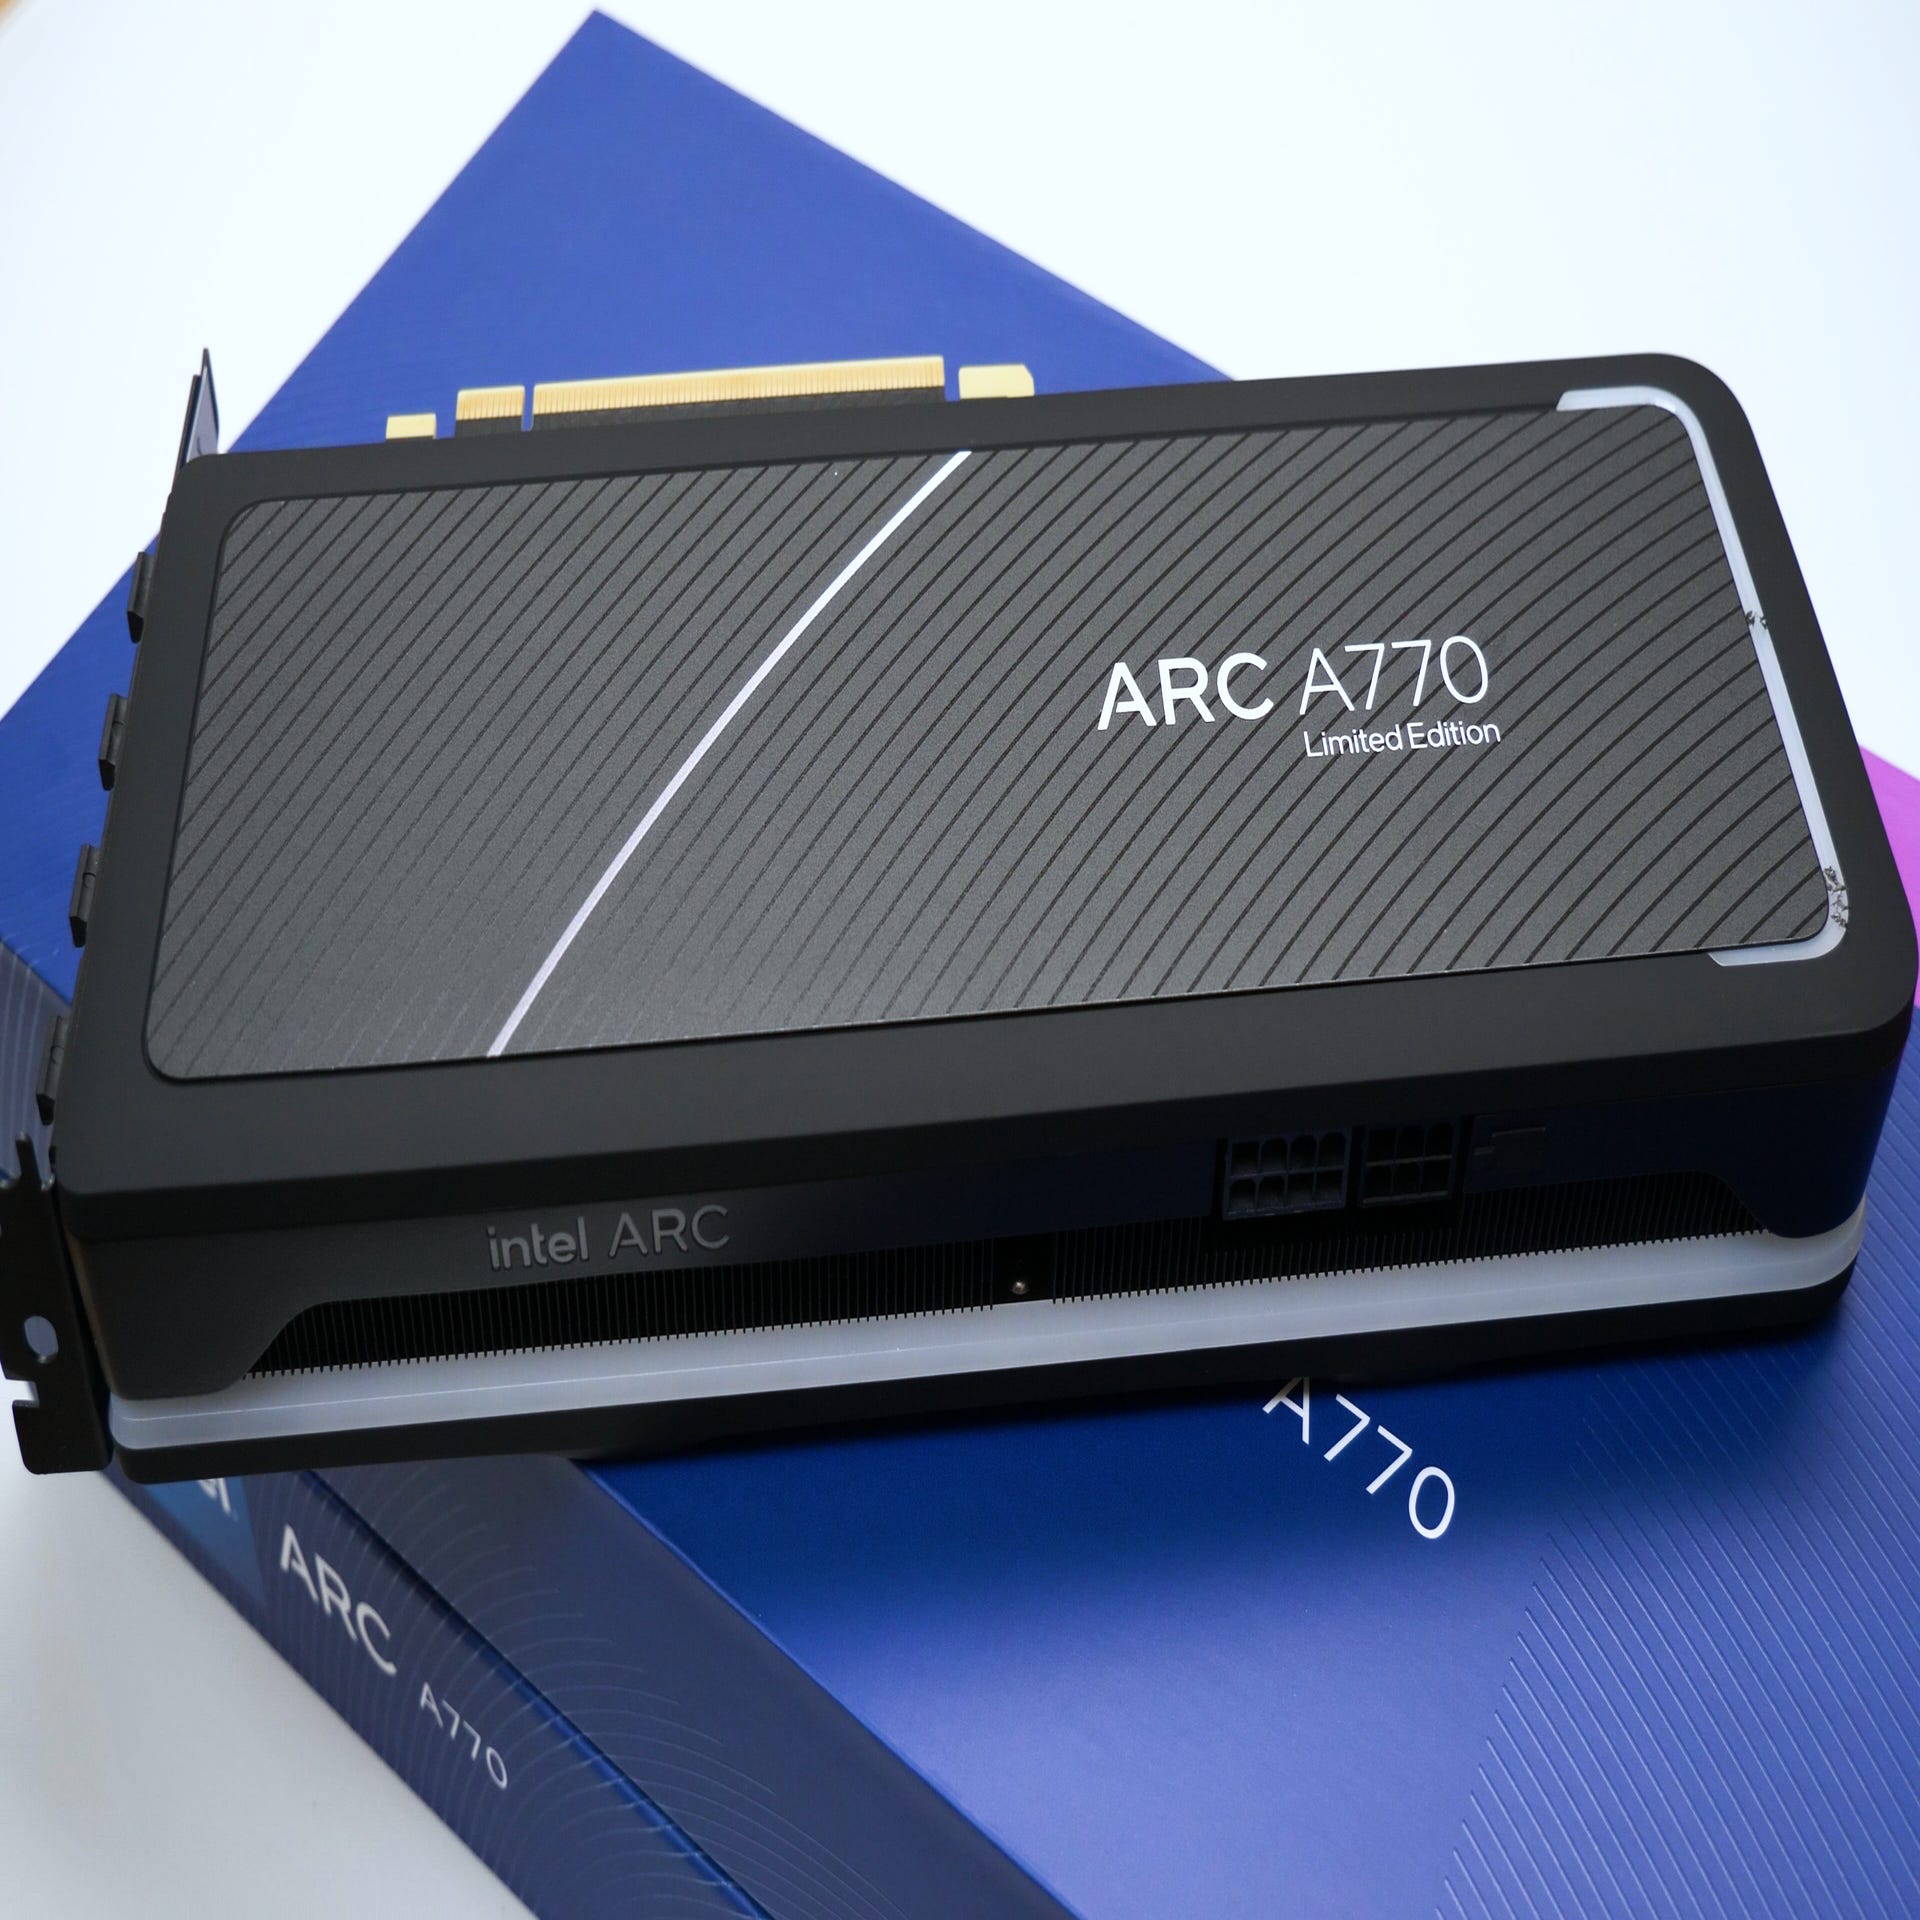 Is The Intel Arc A770 16GB Limited Edition The Full Metal